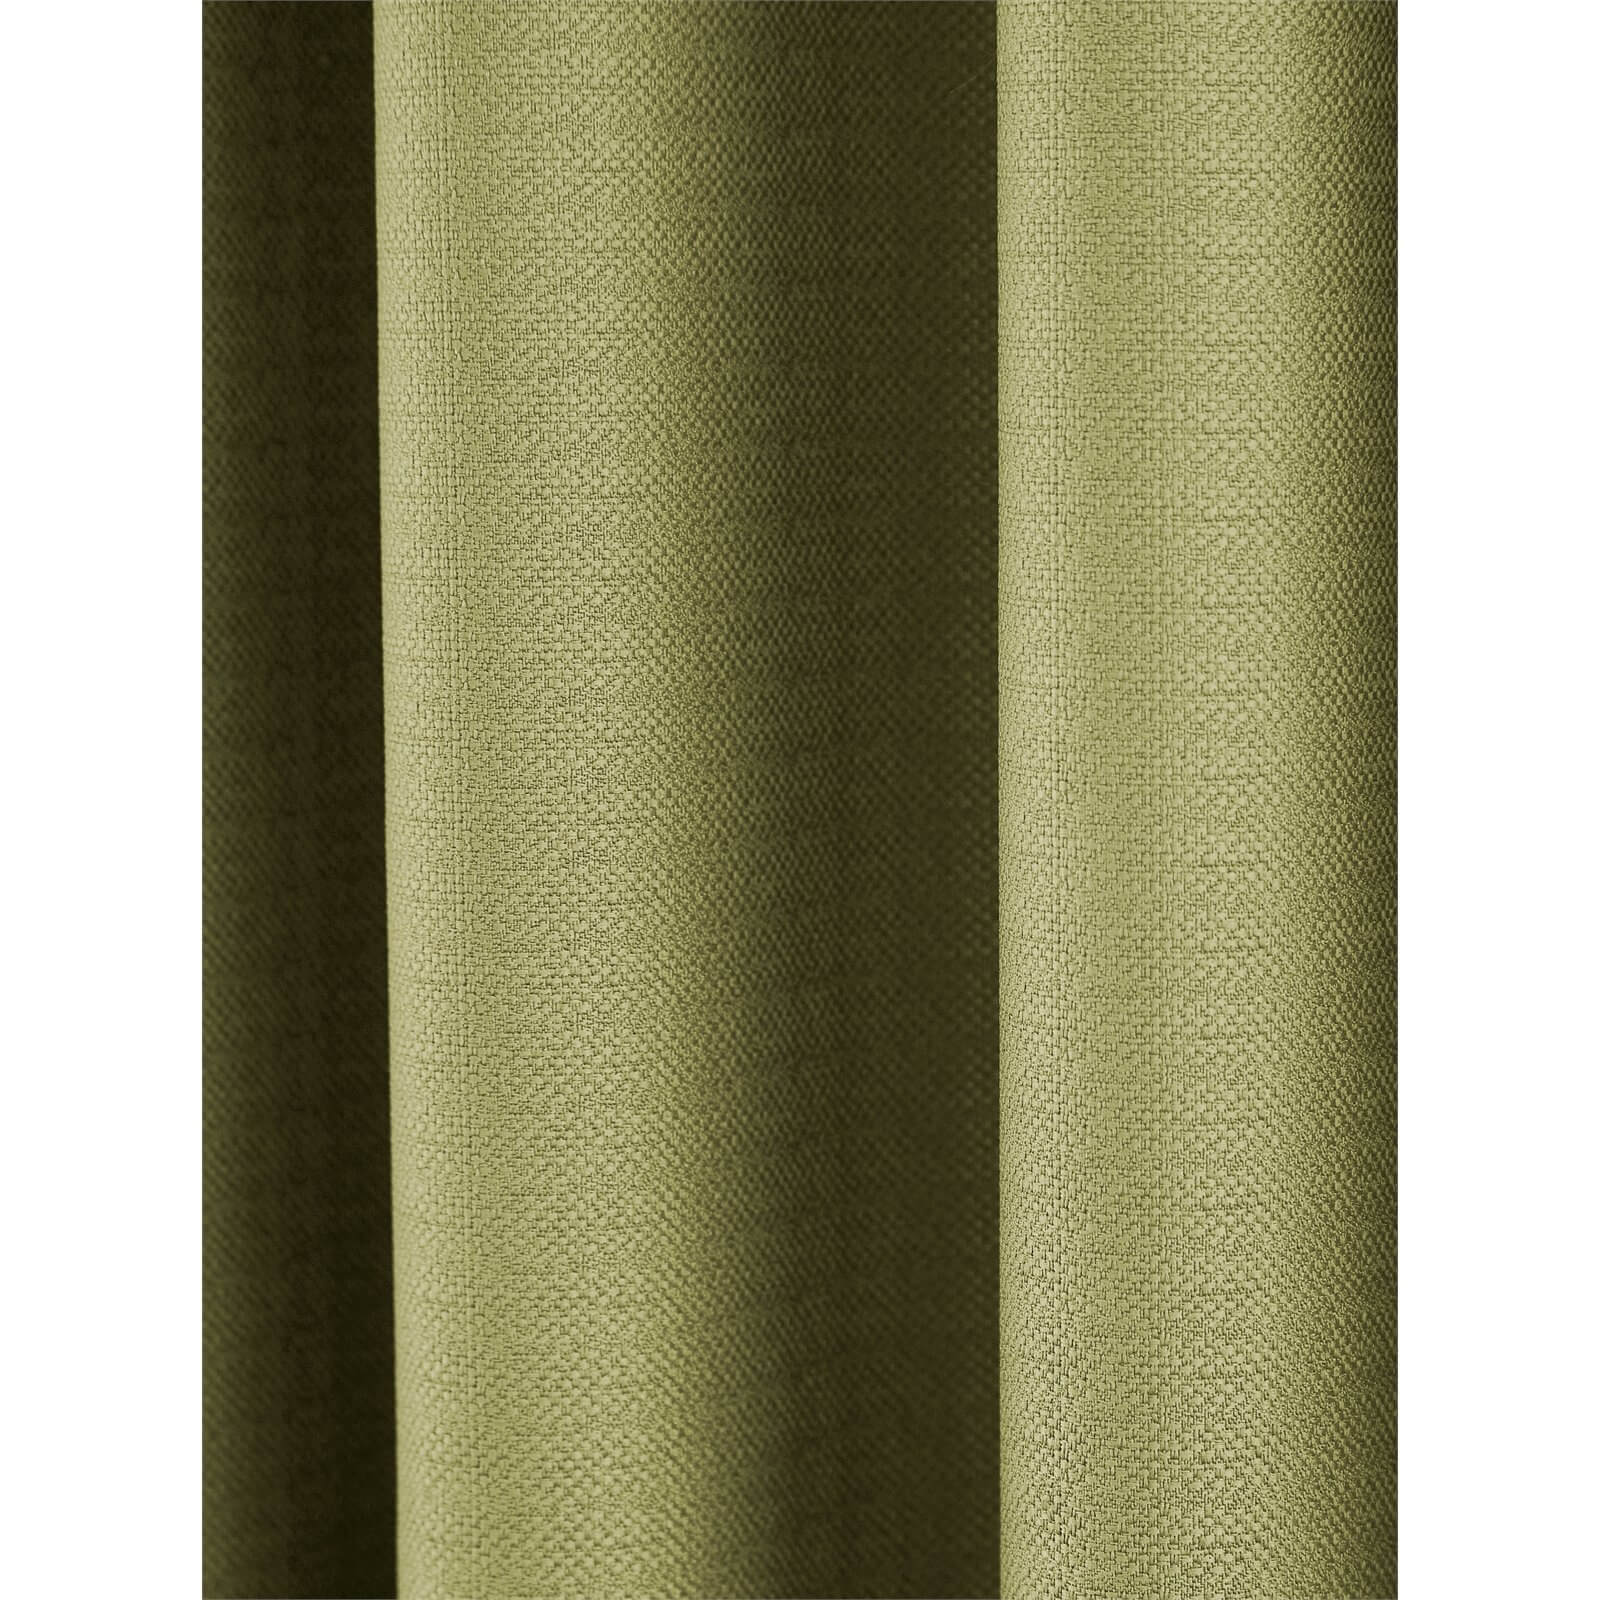 Helena Springfield Eden Lined Curtains 66 x 72 - Willow